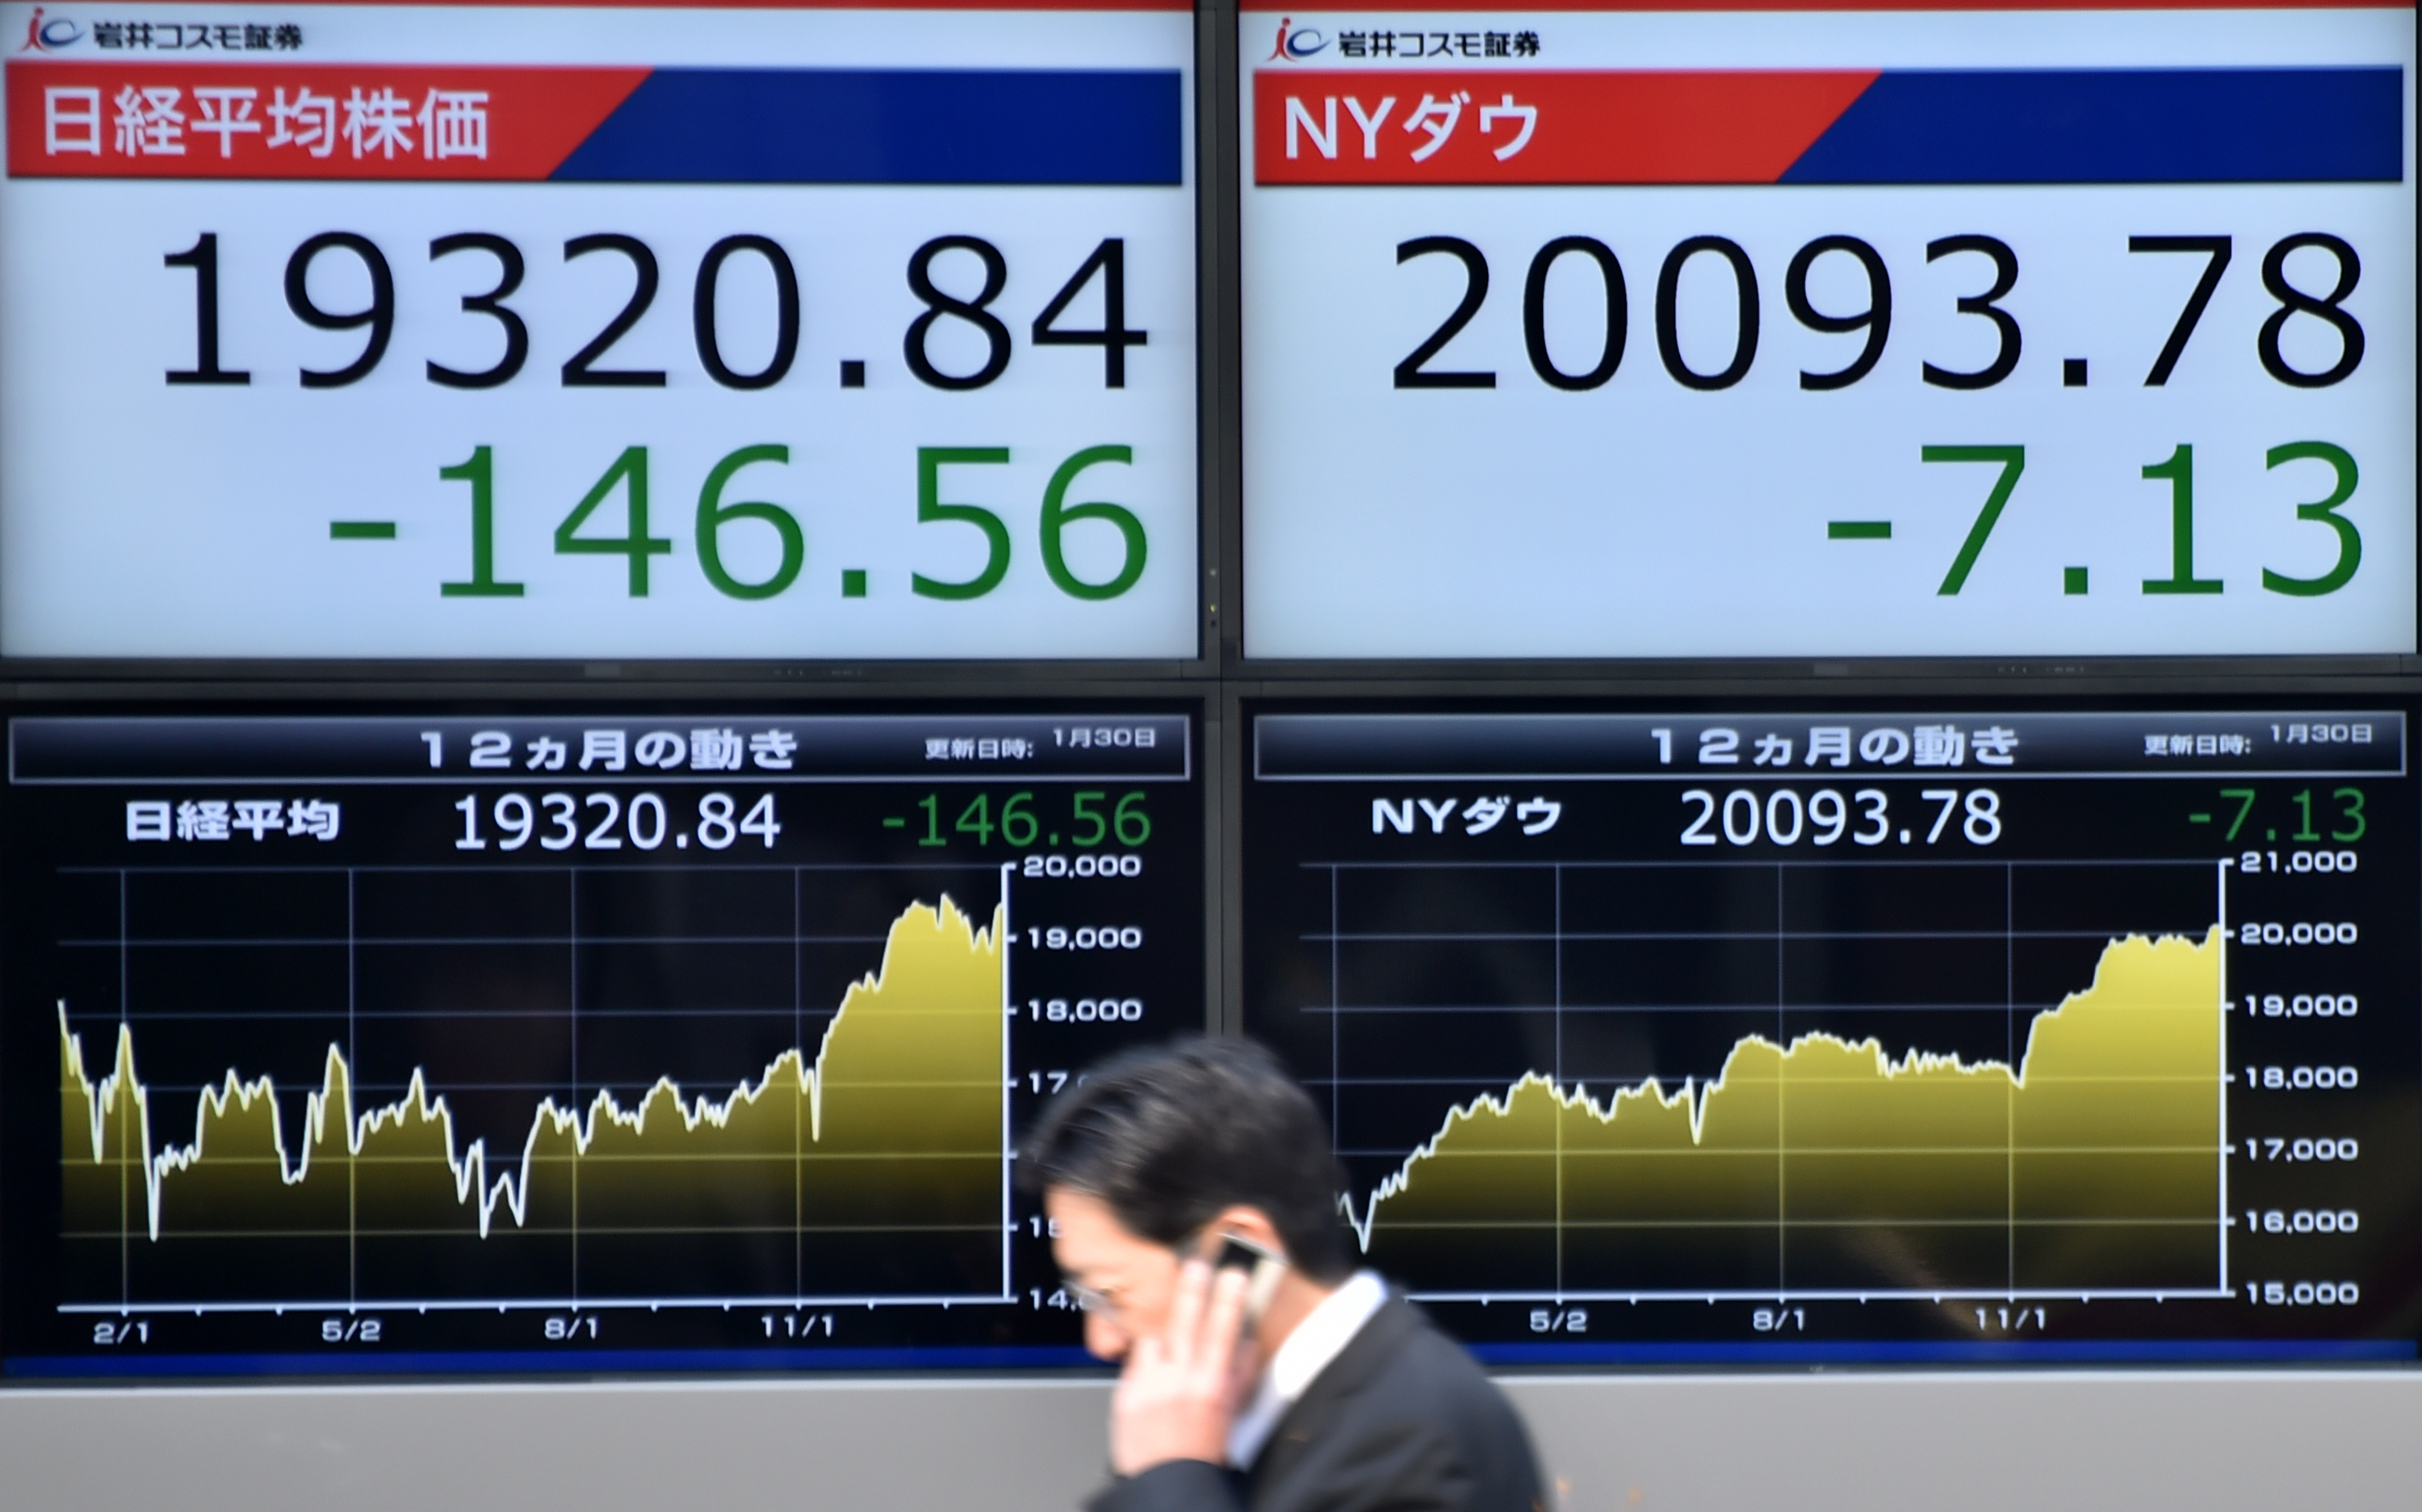 A pedestrian walks in front of an electric quotation board flashing stock prices on the Nikkei key index of the Tokyo Stock Exchange (L) and numbers from the New York markets (R) in Tokyo on January 30, 2017. Tokyo stocks fell early on January 30 as investors cashed in on recent gains with uncertainty surrounding US President Donald Trump's policies. / AFP PHOTO / KAZUHIRO NOGI